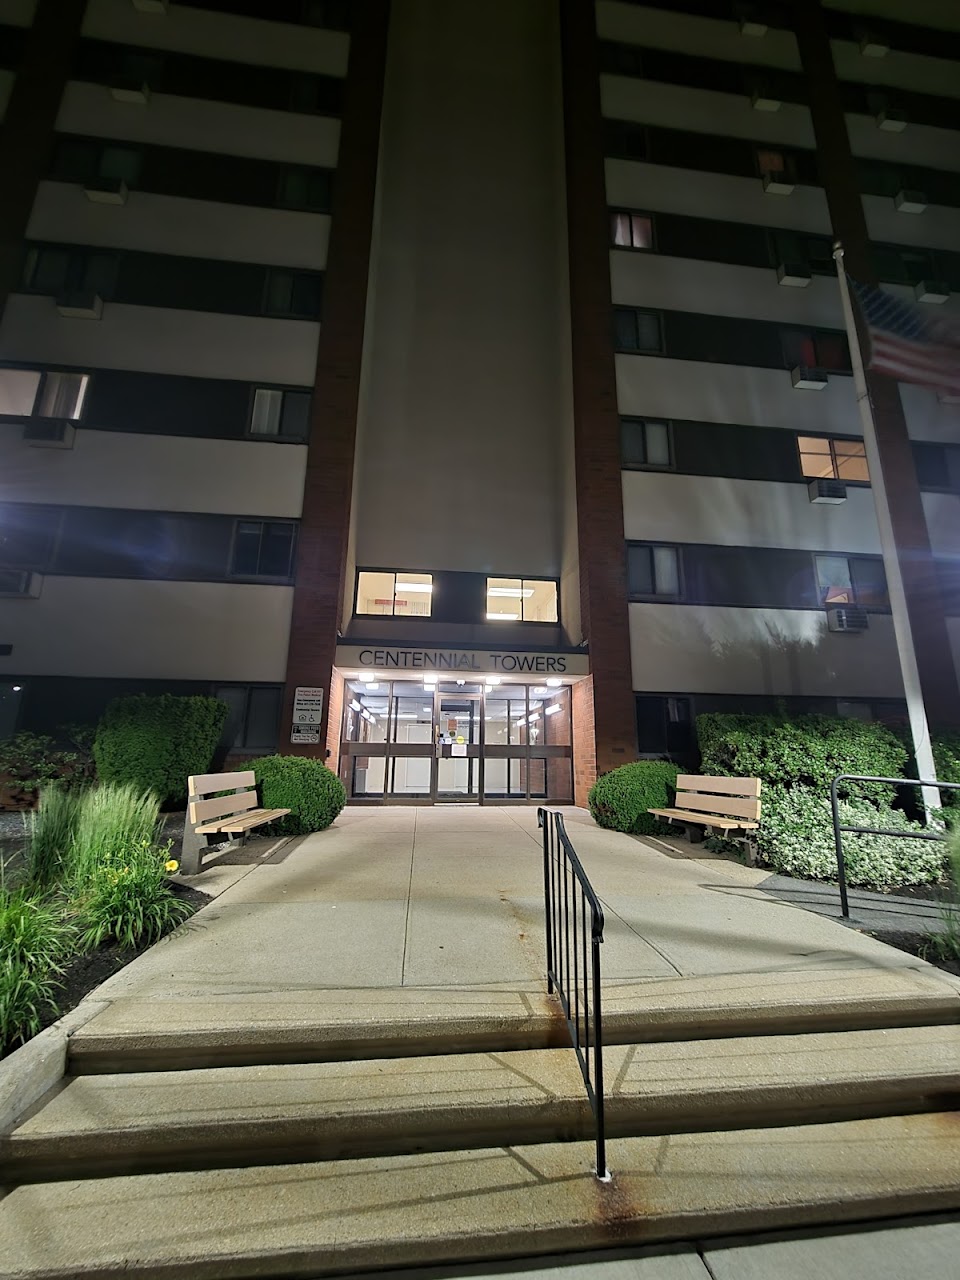 Photo of CENTENNIAL TOWERS. Affordable housing located at 35 GOFF AVE PAWTUCKET, RI 02860